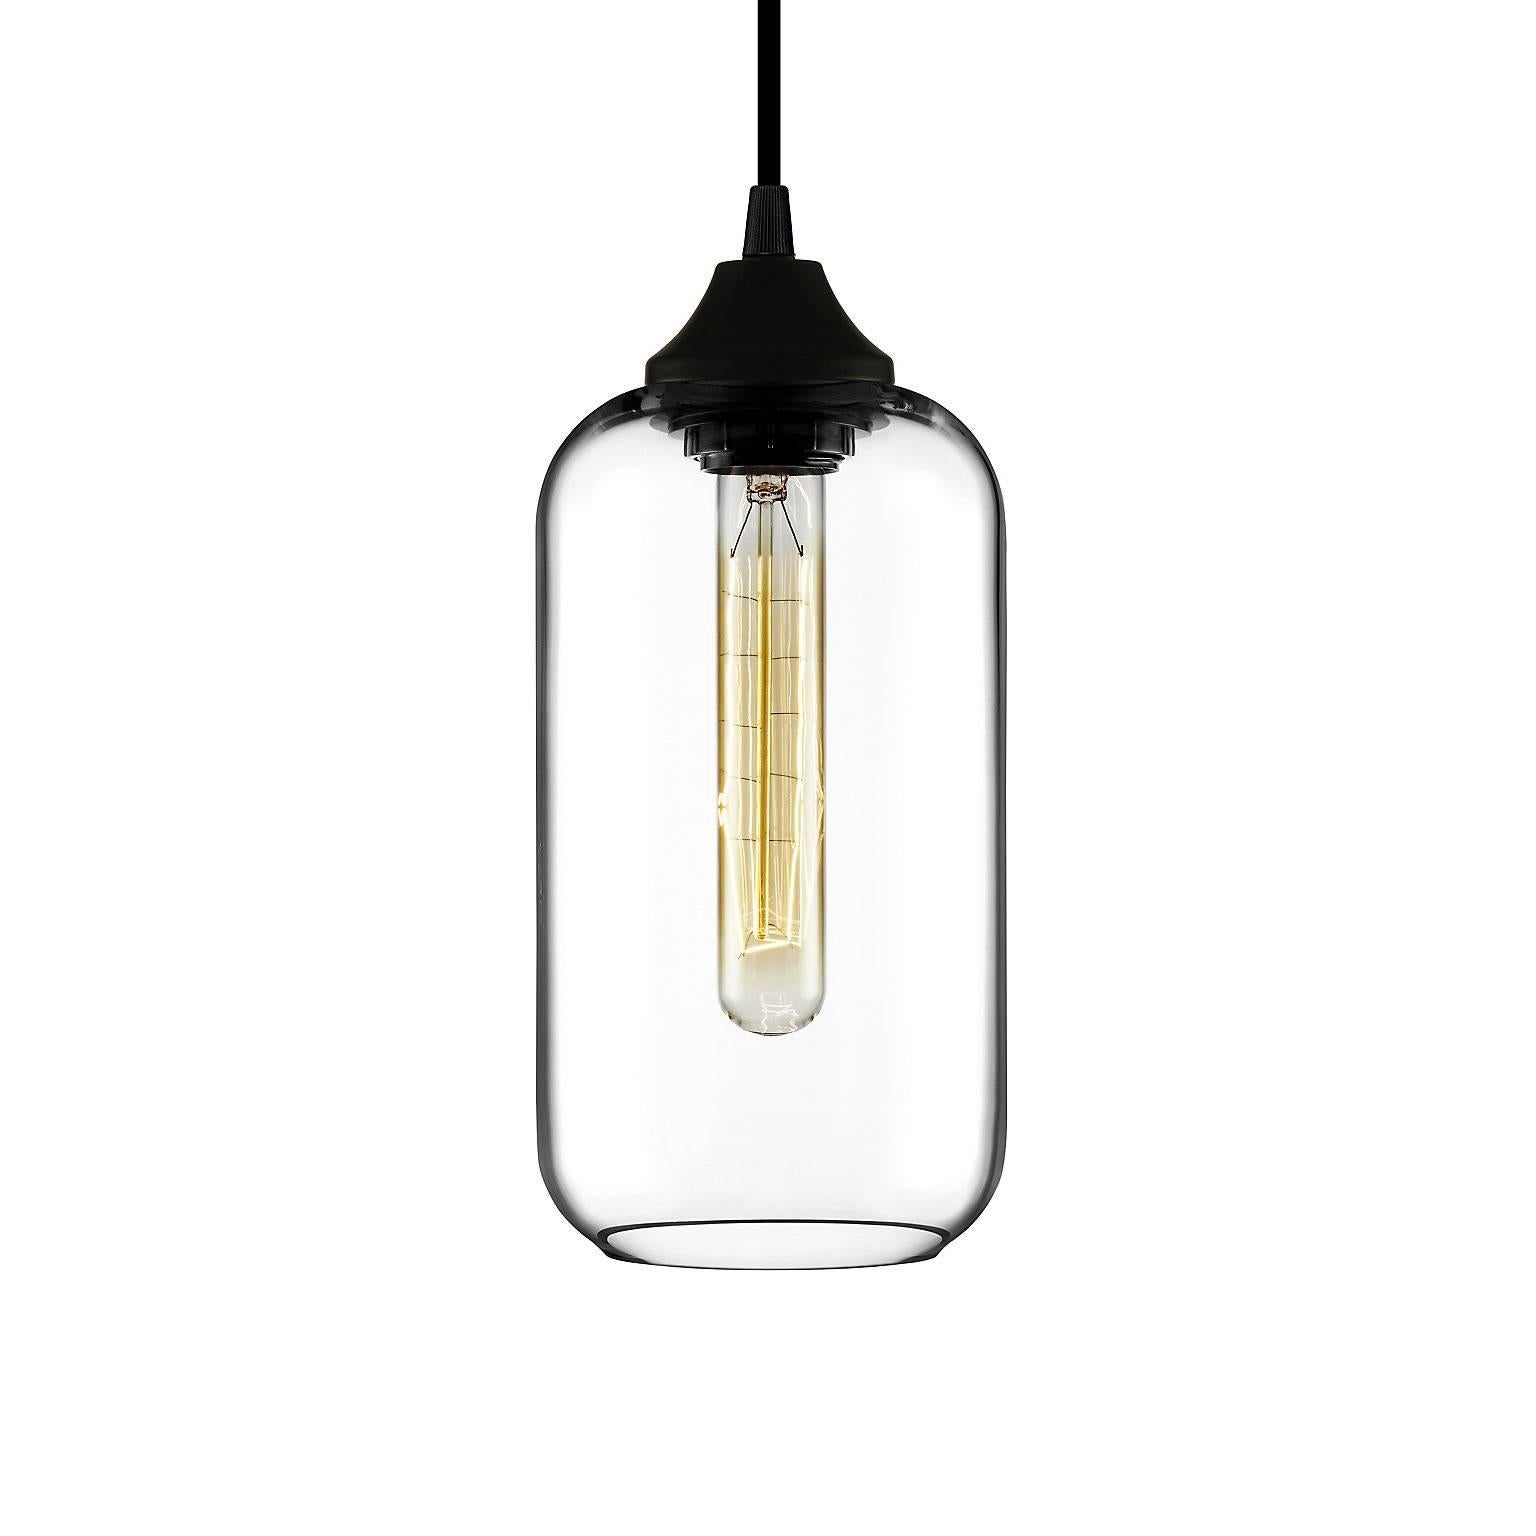 With a vivid array of options in both transparent and opaque glass colors, the compact yet versatile Helio Series charms and delights. The Helio pendant is sleek enough to stand on its own and simple enough to shine in tightly grouped bouquets from